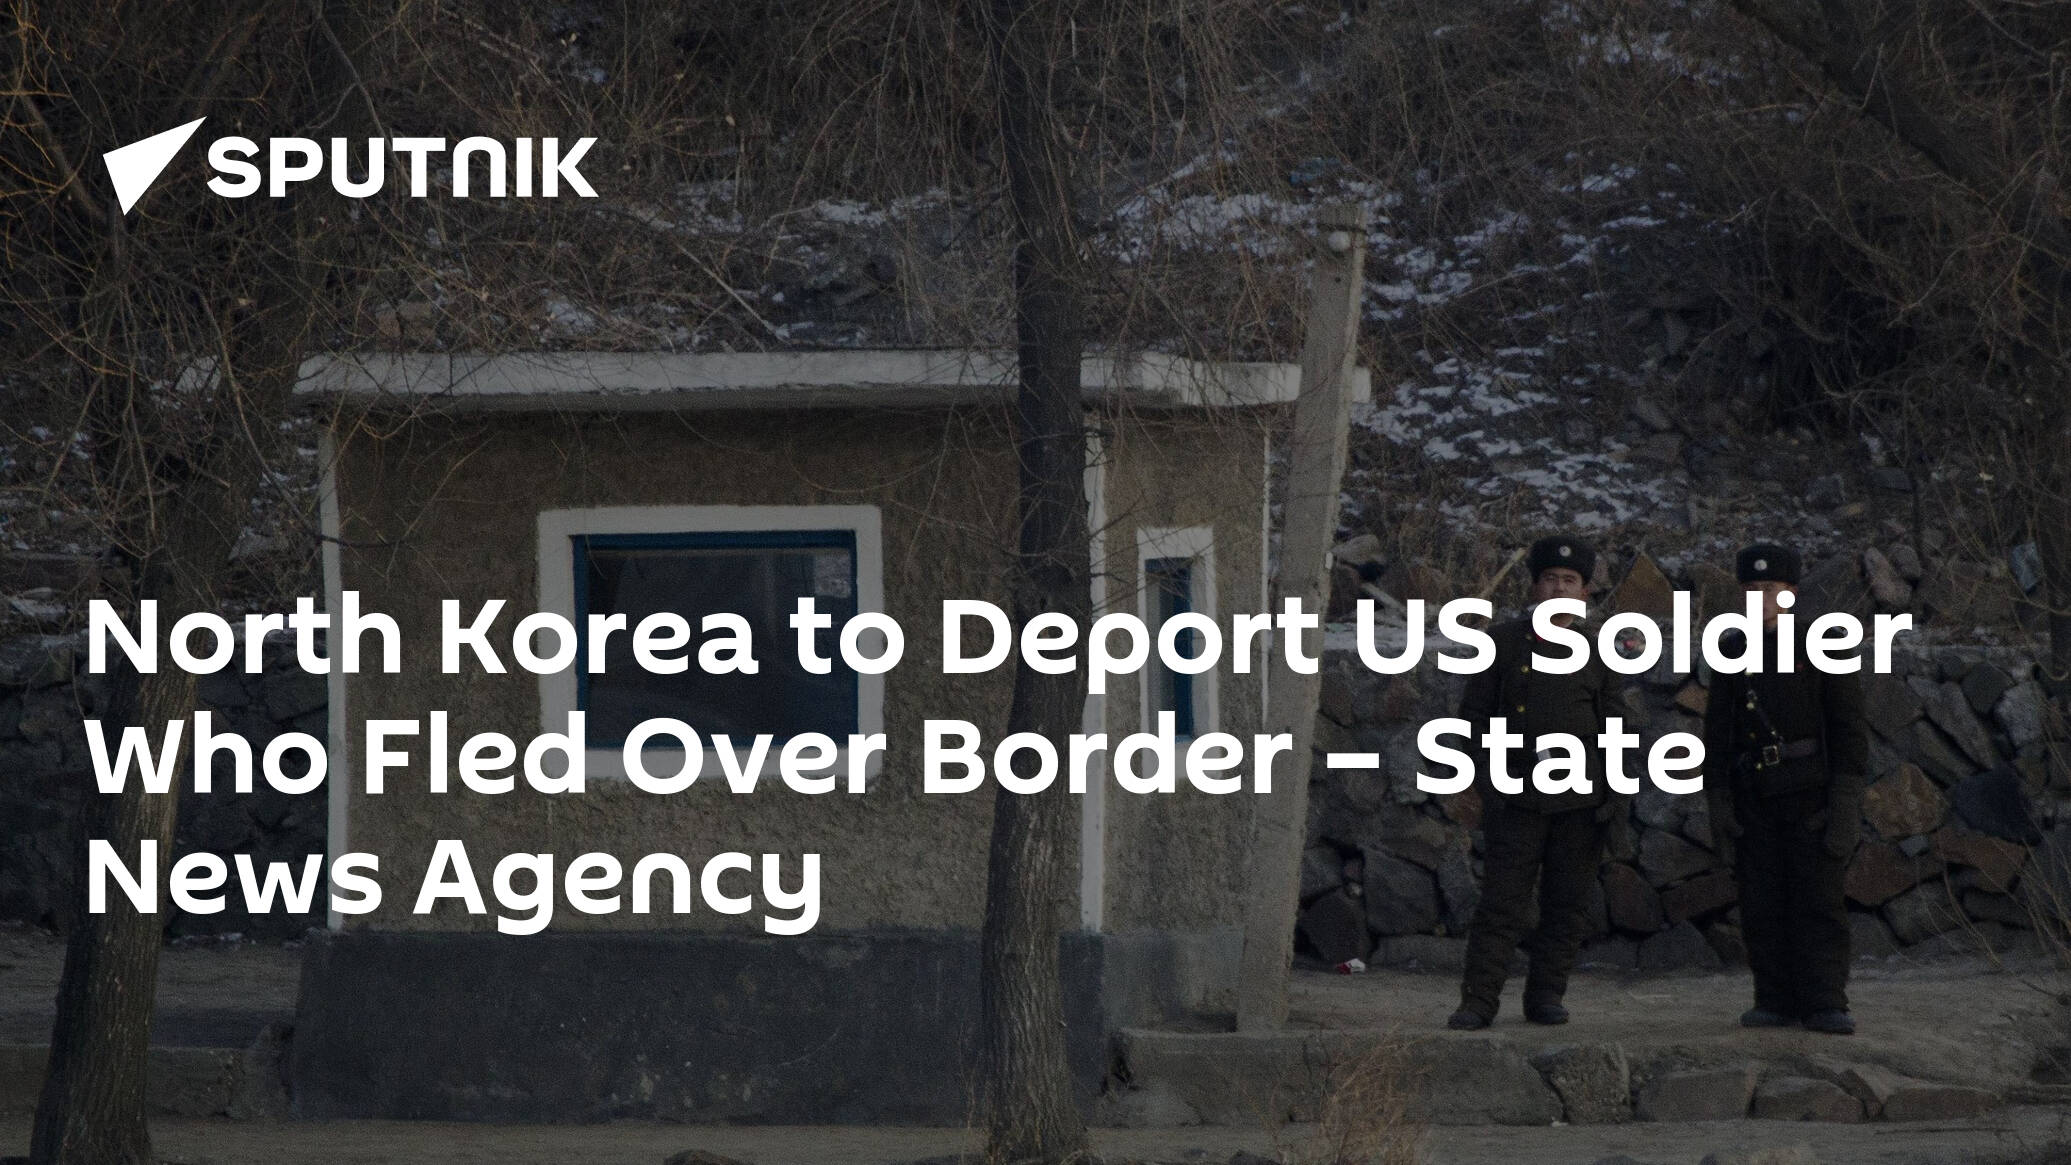 North Korea to Deport US Soldier Who Fled Over Border – State News Agency